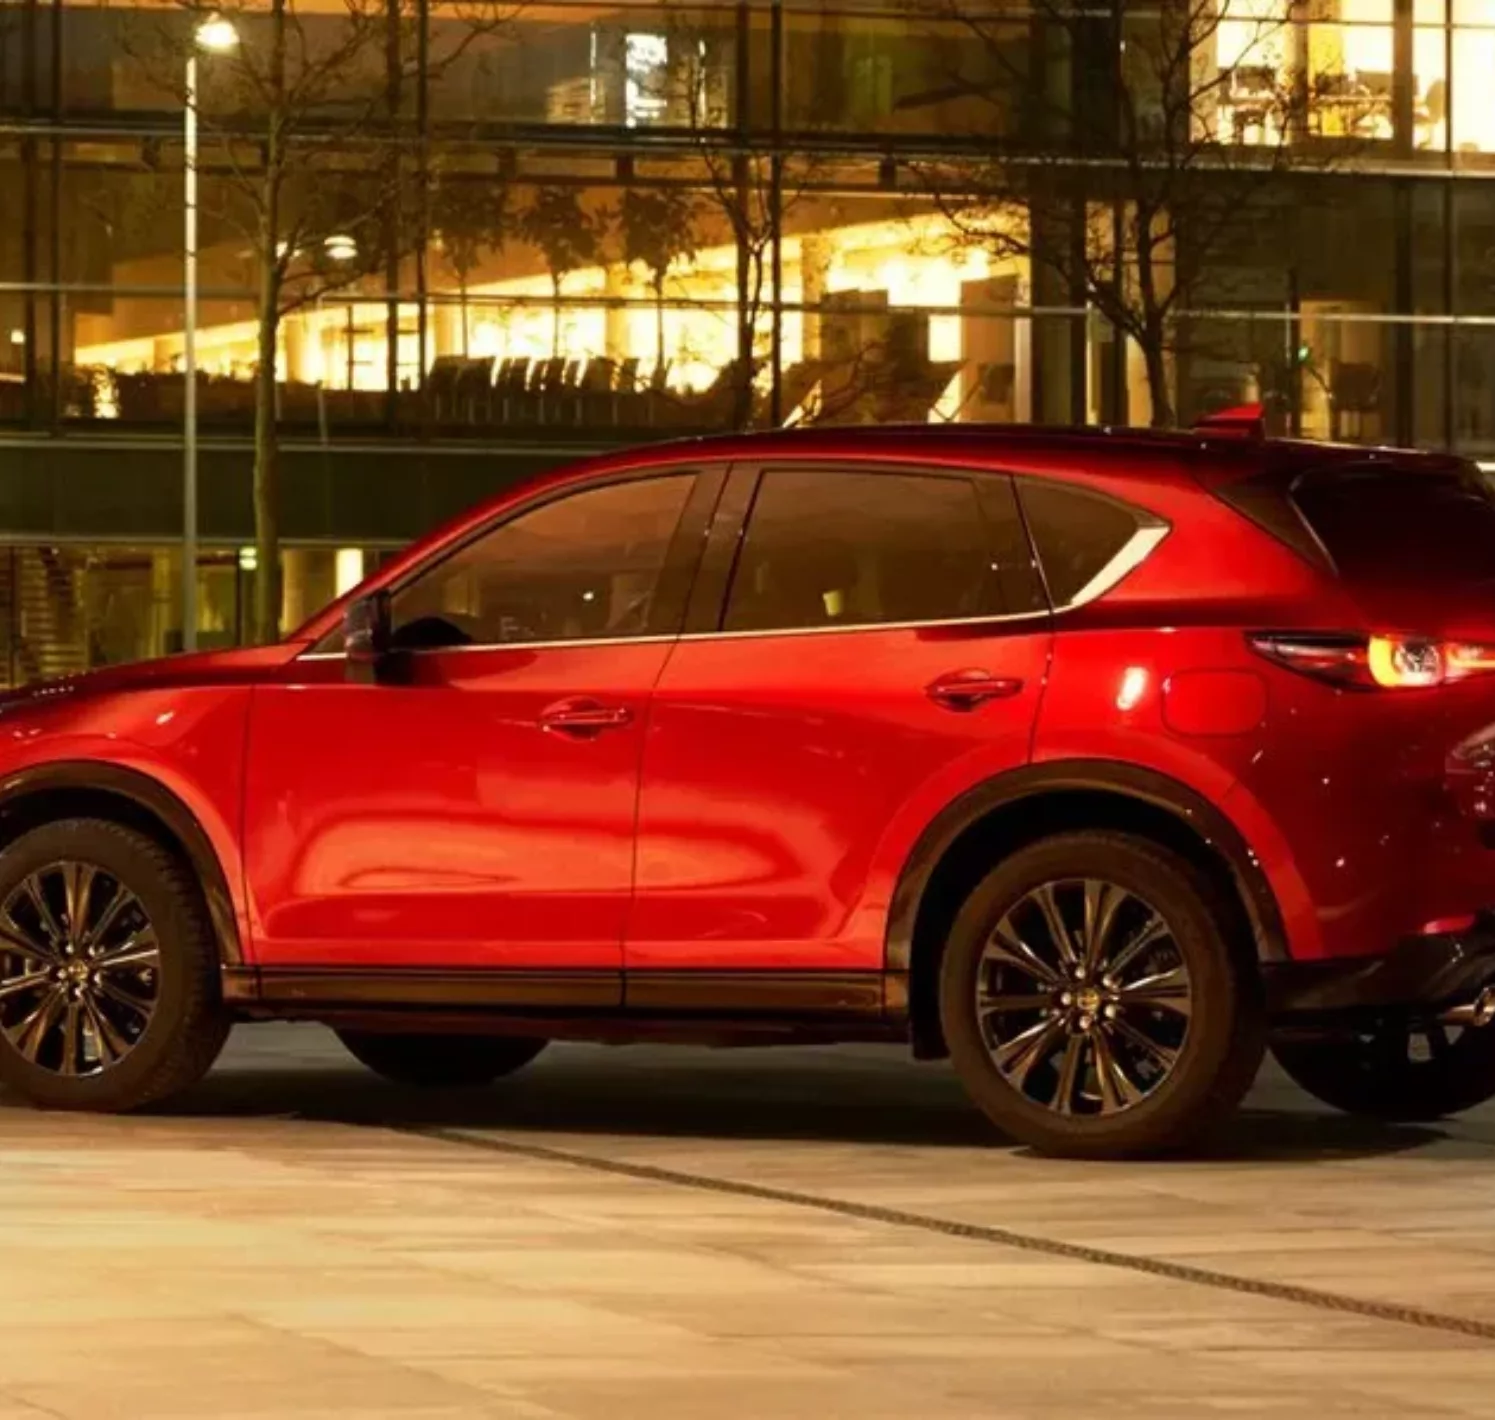 https://autofilter.sk/assets/images/cx-5/gallery/2022-mazda-cx-5-compact-crossover-suv-1631627143.webp - obrazok